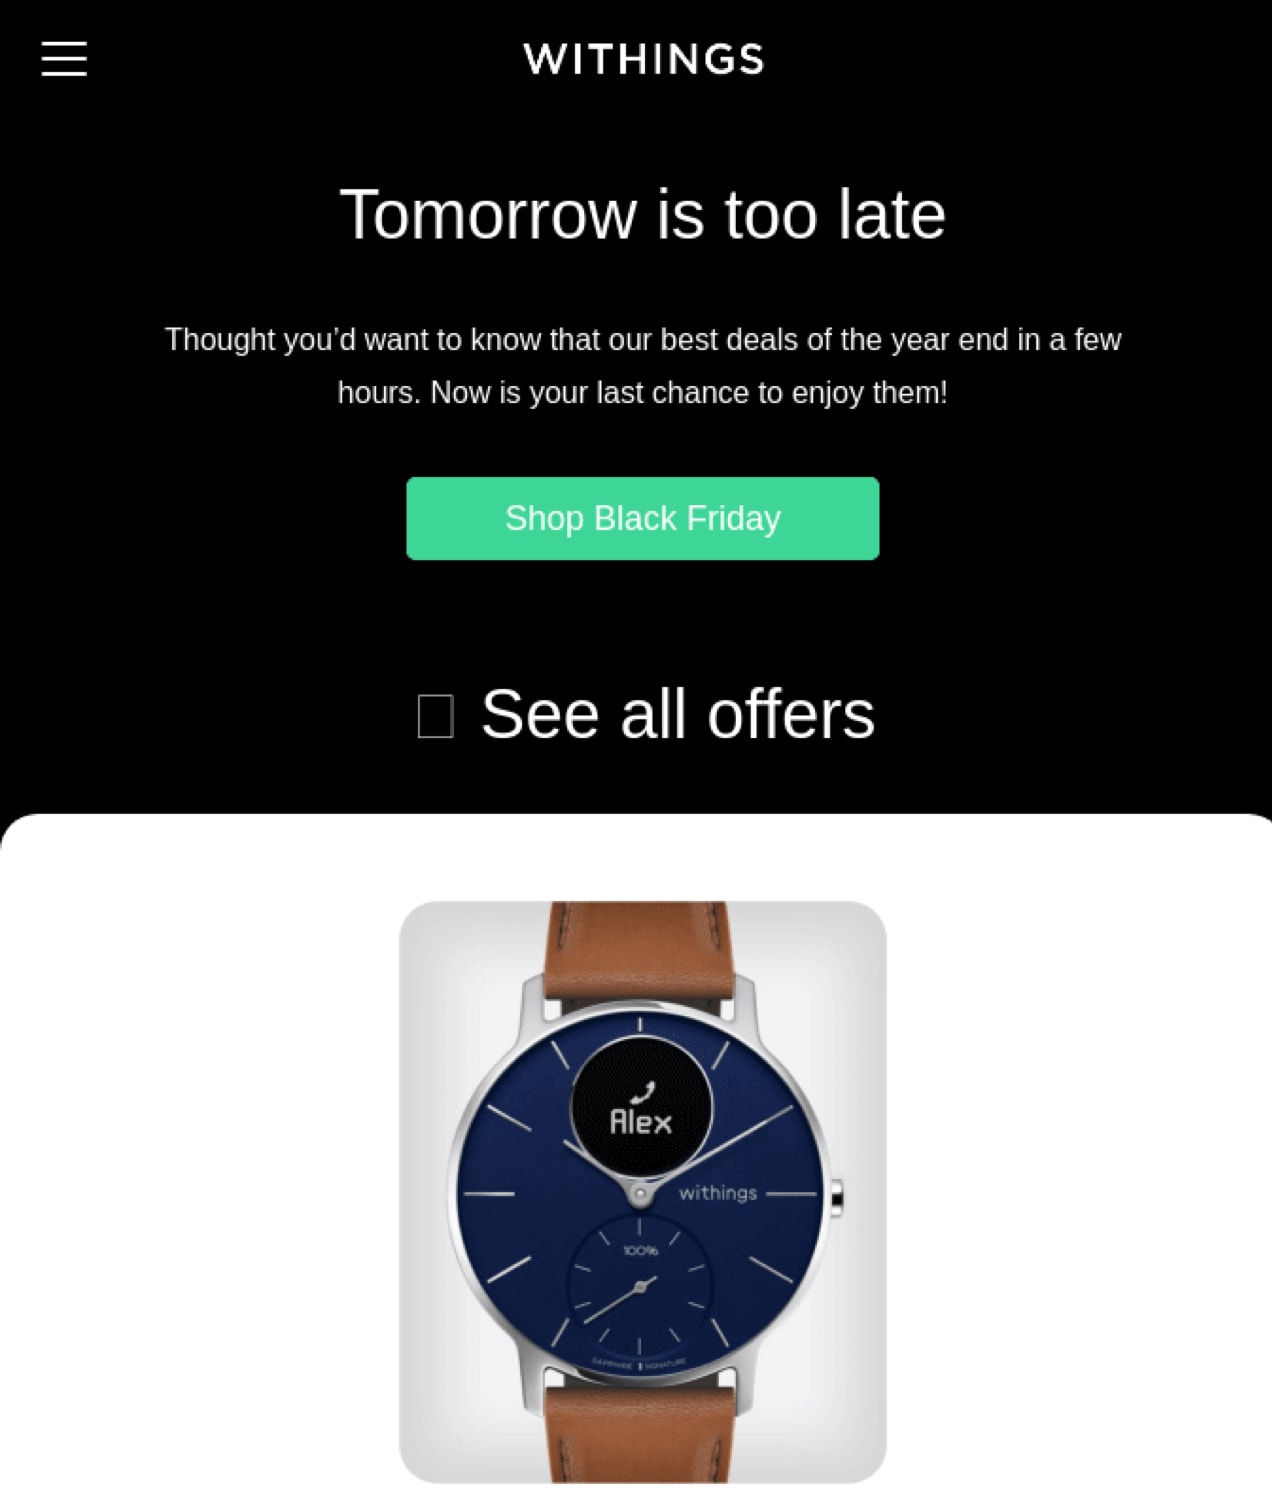 email with the warning that "tomorrow is too late"